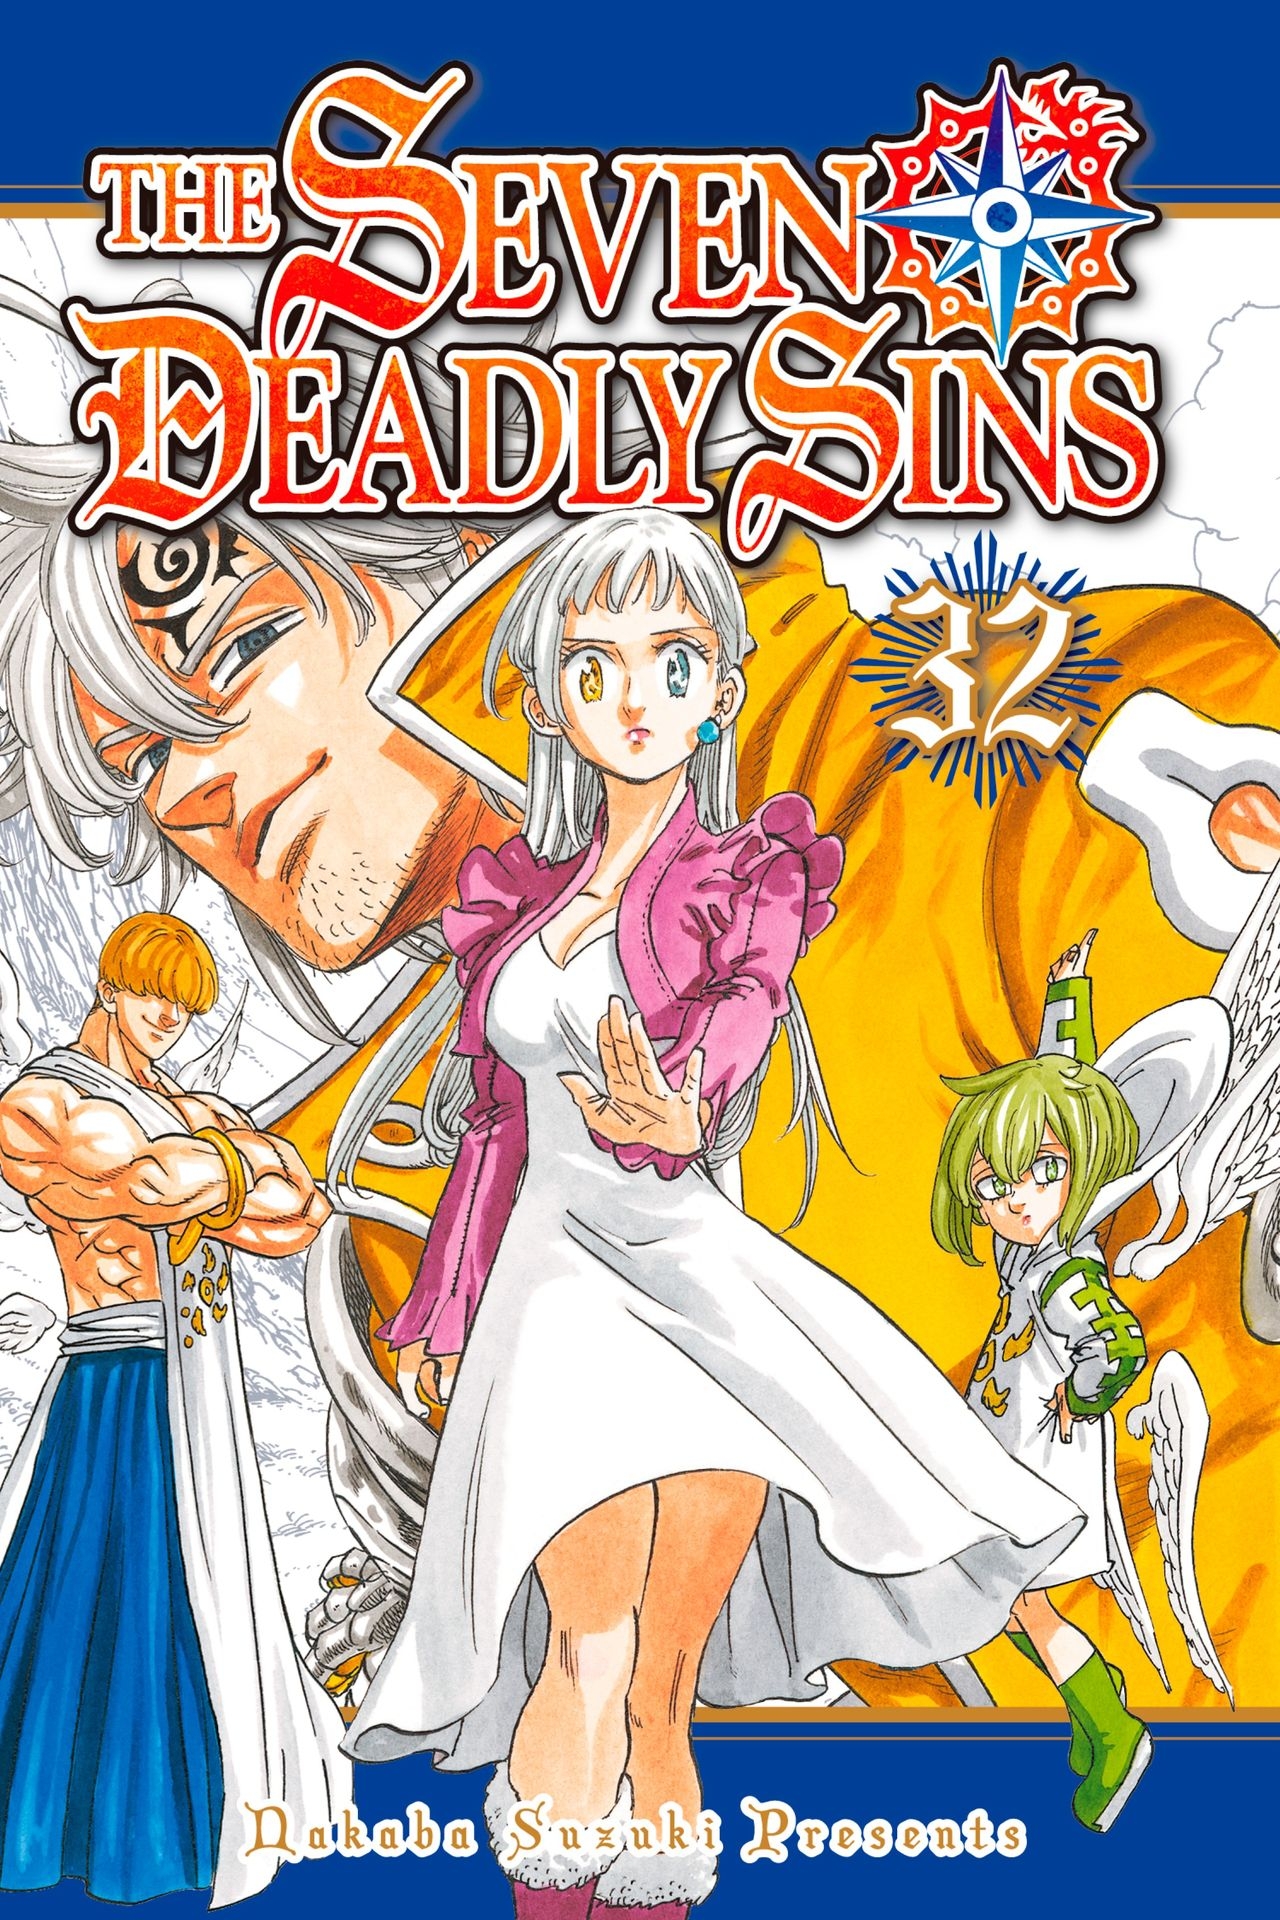 The Seven Deadly Sins (Covers & Chapter Title Cards) 184